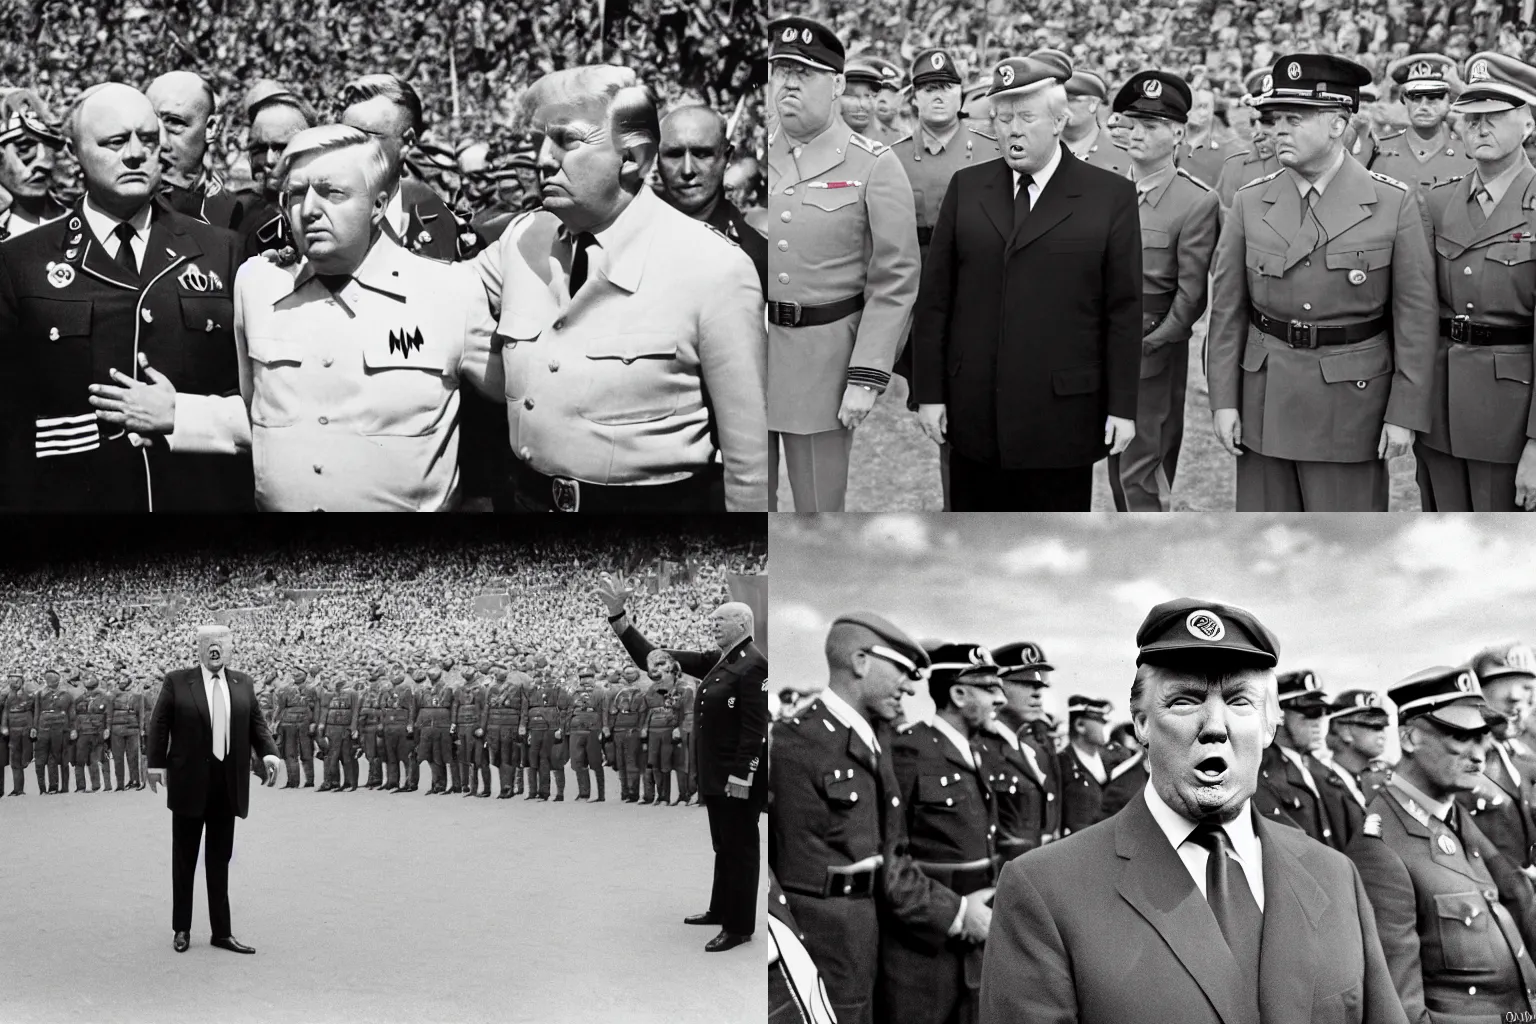 Prompt: upper body portrait of Donald Trump wearing Reichsstaffelführer outfit yelling angrily, standing alongside Schutzstaffel, inside a busy stadium designed by Marcello Piacentini, off-camera flash, canon 24mm f4 aperture, Ektachrome color photograph